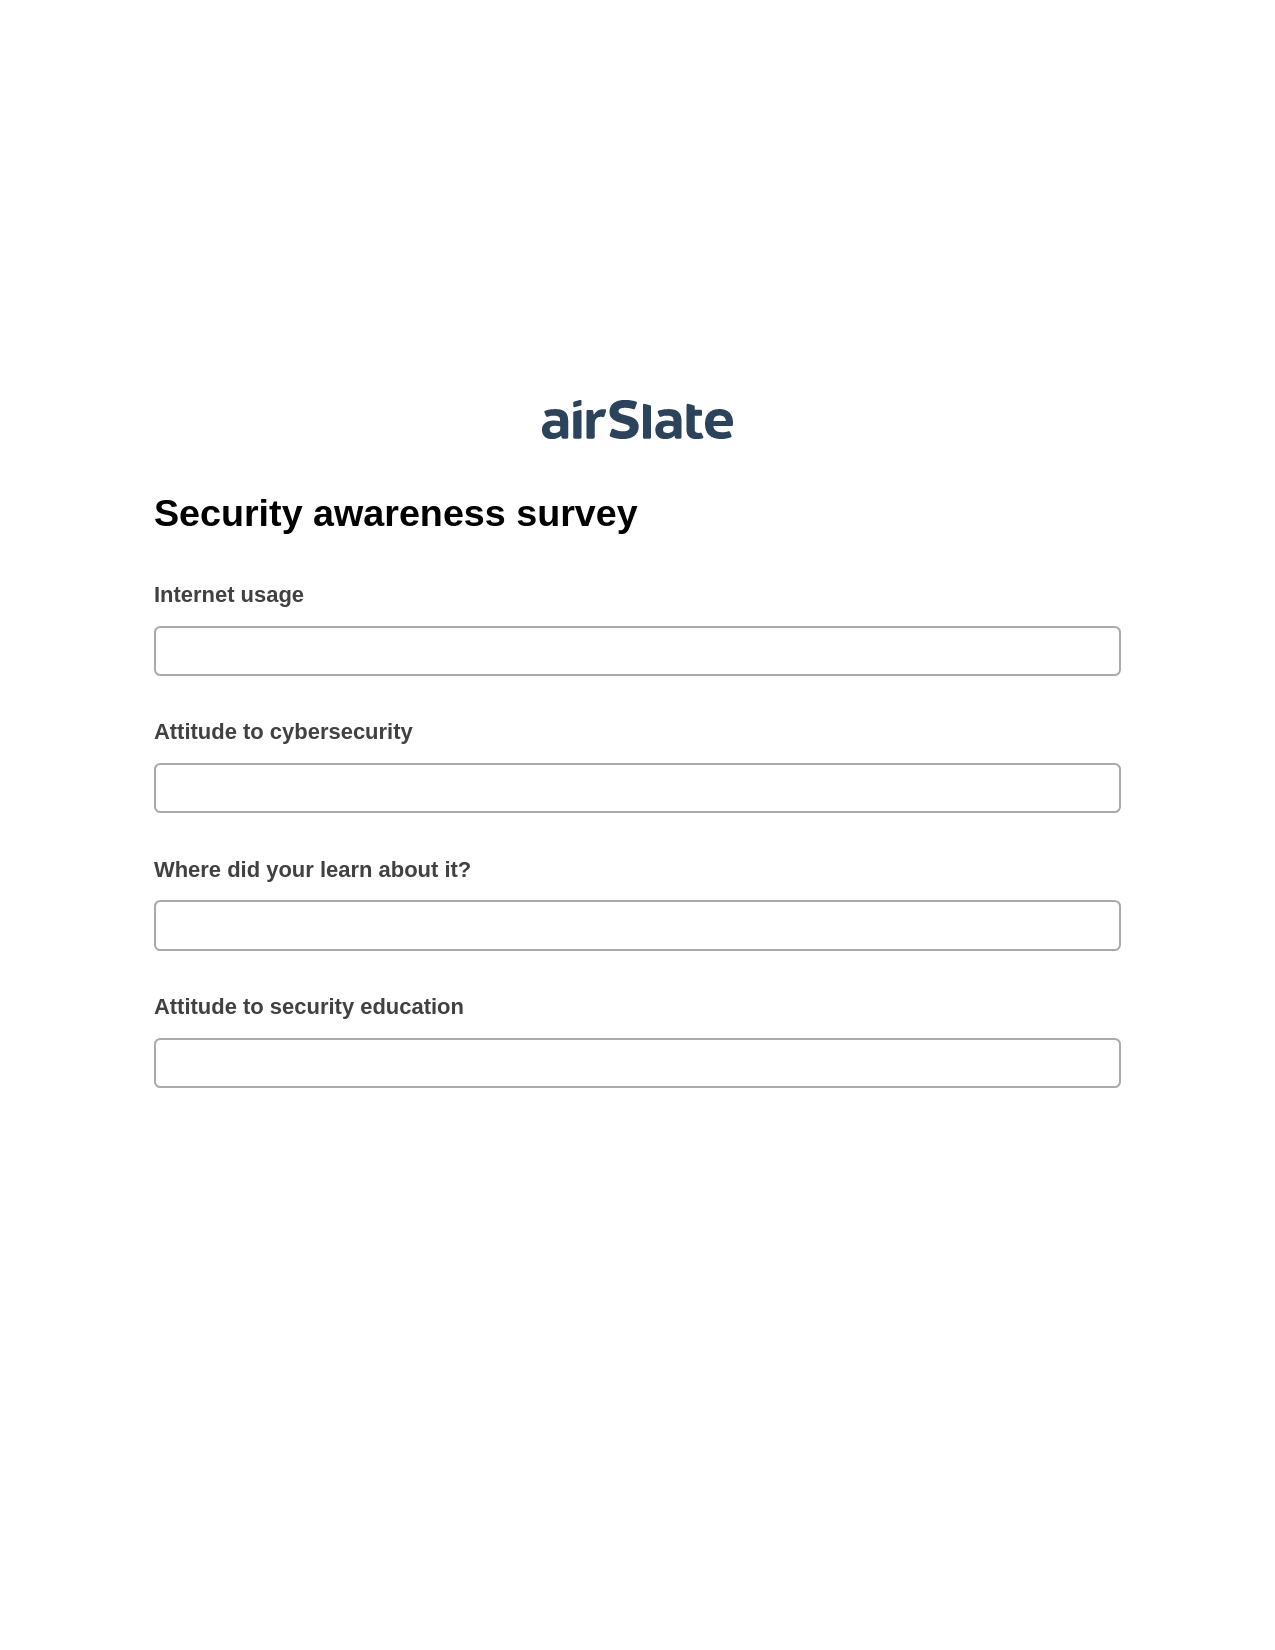 Security awareness survey Pre-fill from MS Dynamics 365 Records DEPRECATED, Add Tags to Slate Bot, Export to NetSuite Record Bot